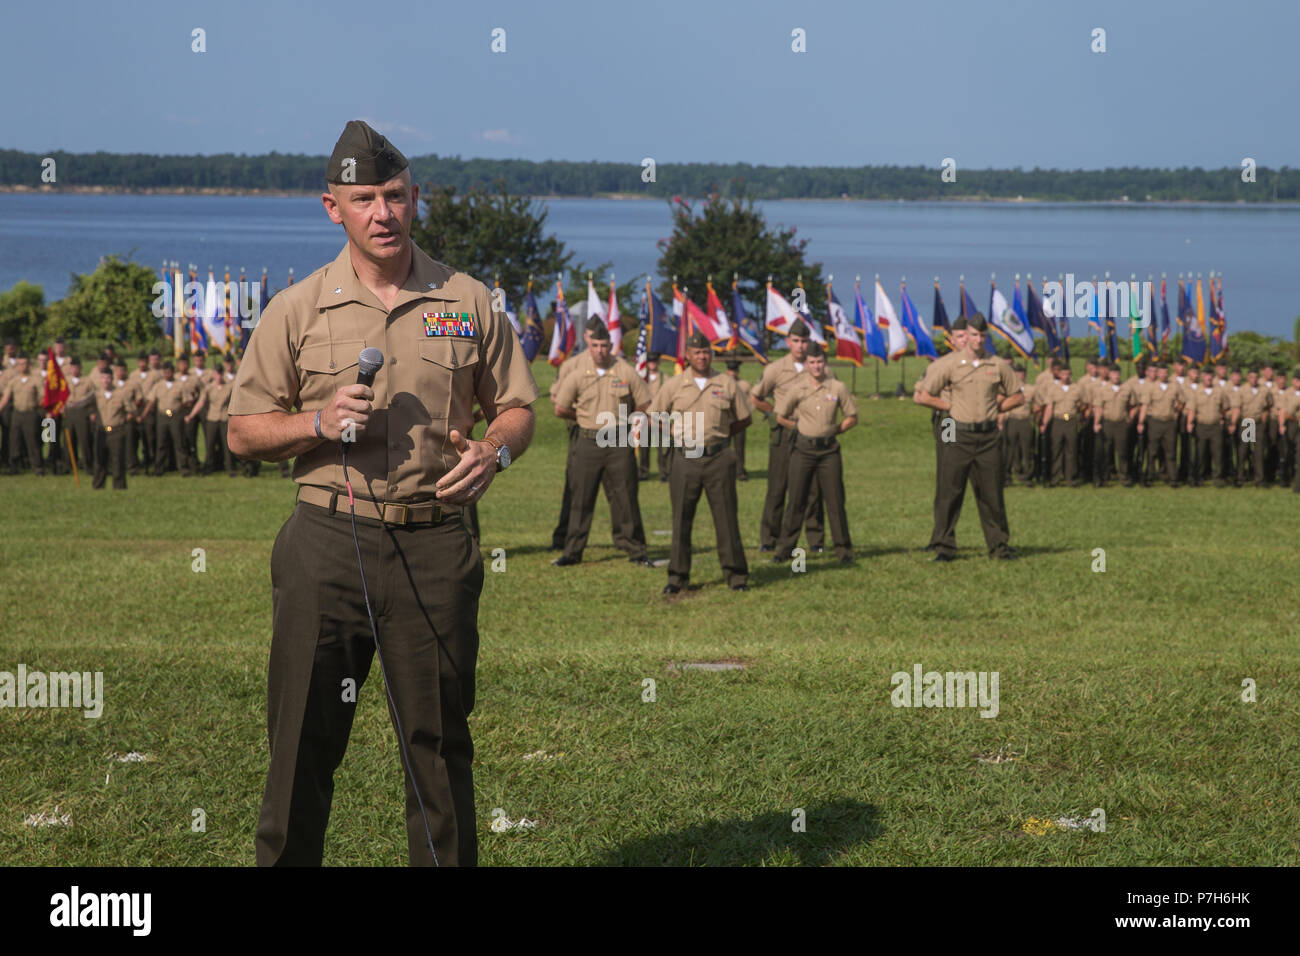 U.S. Marine Corps Lt. Col. Daniel Rosenberg, with Combat Logistics Battalion 6, Combat Logistics Regiment 2, 2nd Marine Logistics Group, addresses Marines of CLB 6 during a change of command ceremony on Camp Lejeune, N.C., June 26, 2018.  During the ceremony, Lt. Col. Karin Fitzgerald relinquished command of CLB 6 to Lt. Col. Daniel Rosenberg. (U.S. Marine Corps photo by Lance Cpl. Scott Jenkins) Stock Photo